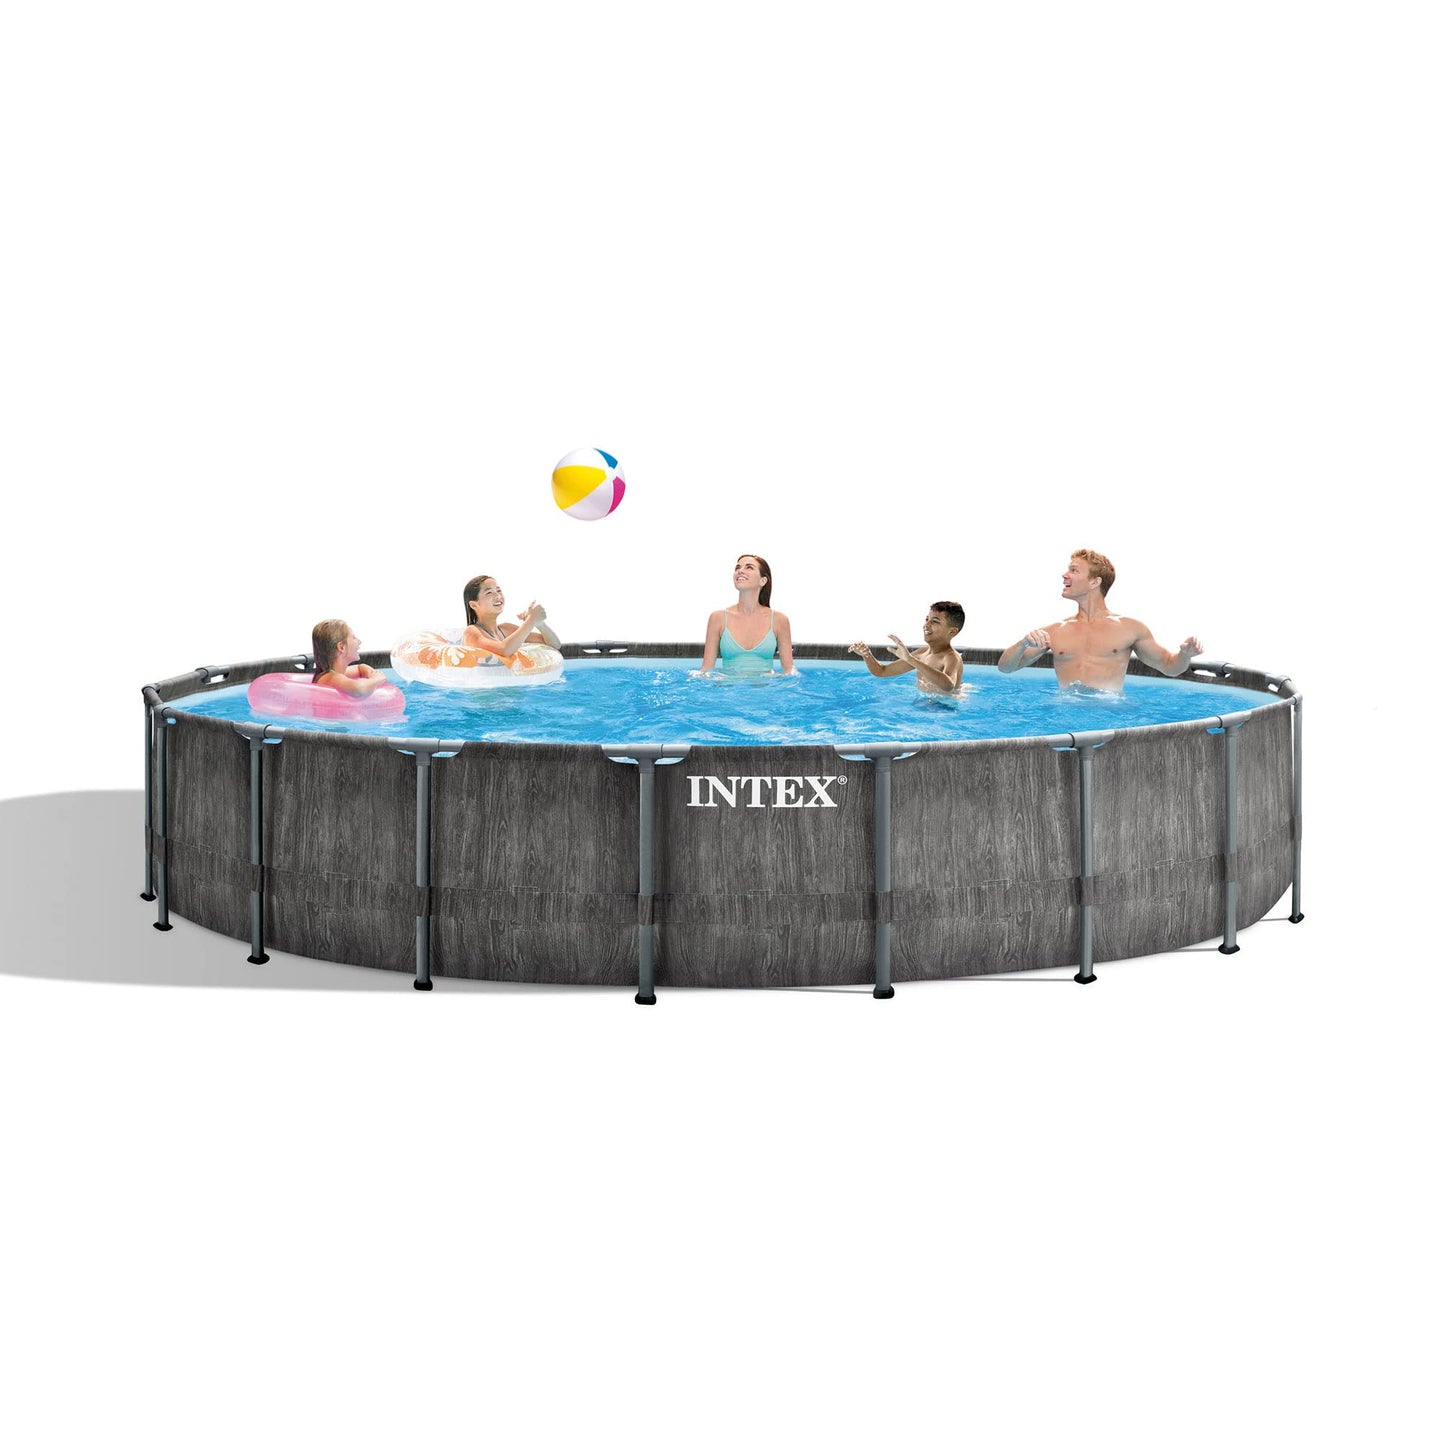 Intex Greywood Prism Frame 18' x 48" Round Above Ground Outdoor Swimming Pool Set with 1500 GPH Filter Pump, Ladder, Ground Cloth, and Pool Cover 18 feet